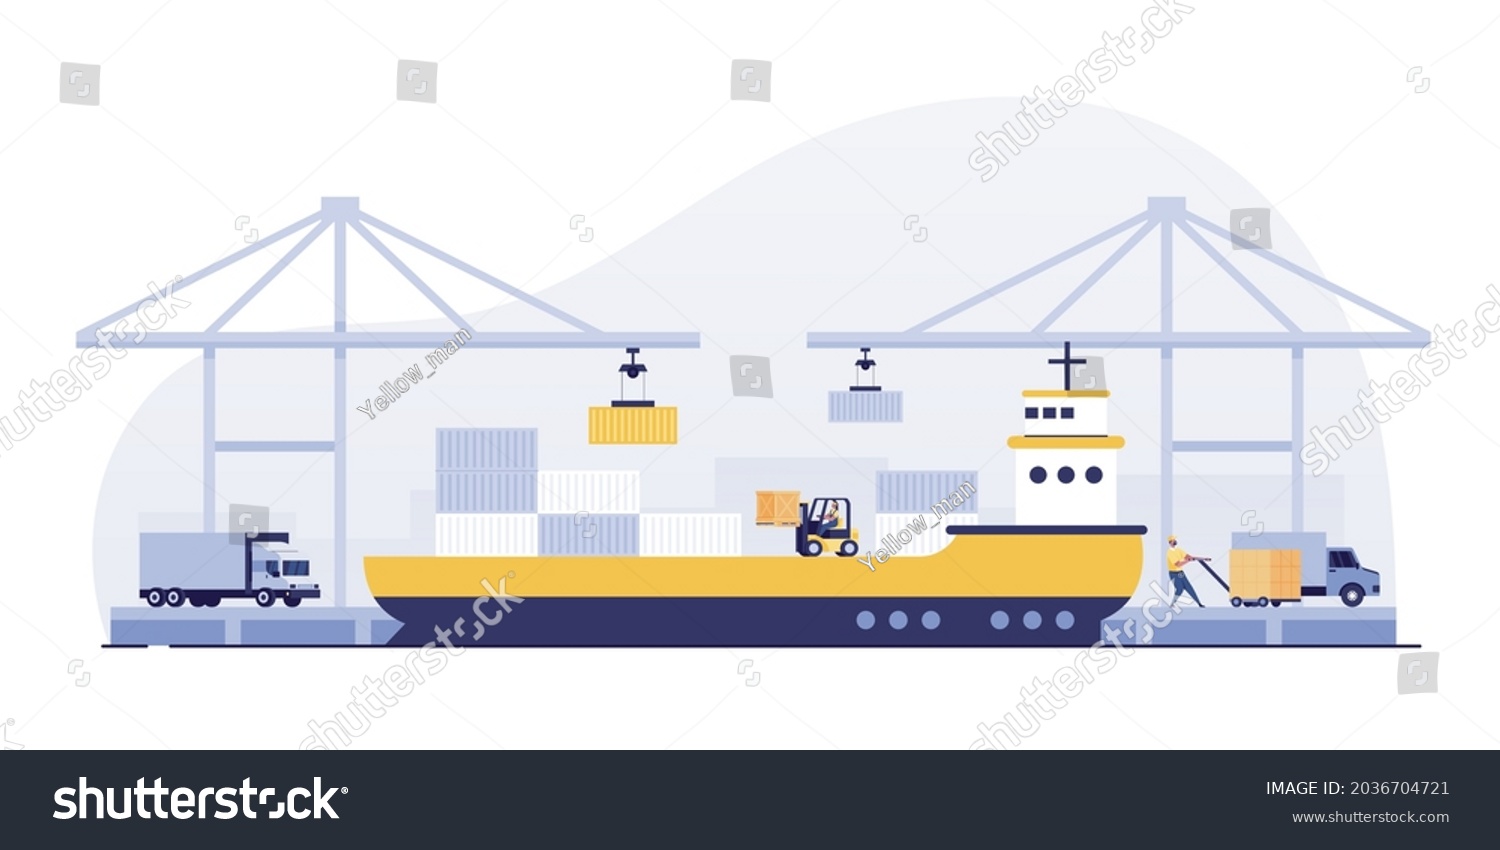 SVG of Container Ships, Break Bulk, Ports with cargo ships and containers work with crane. svg